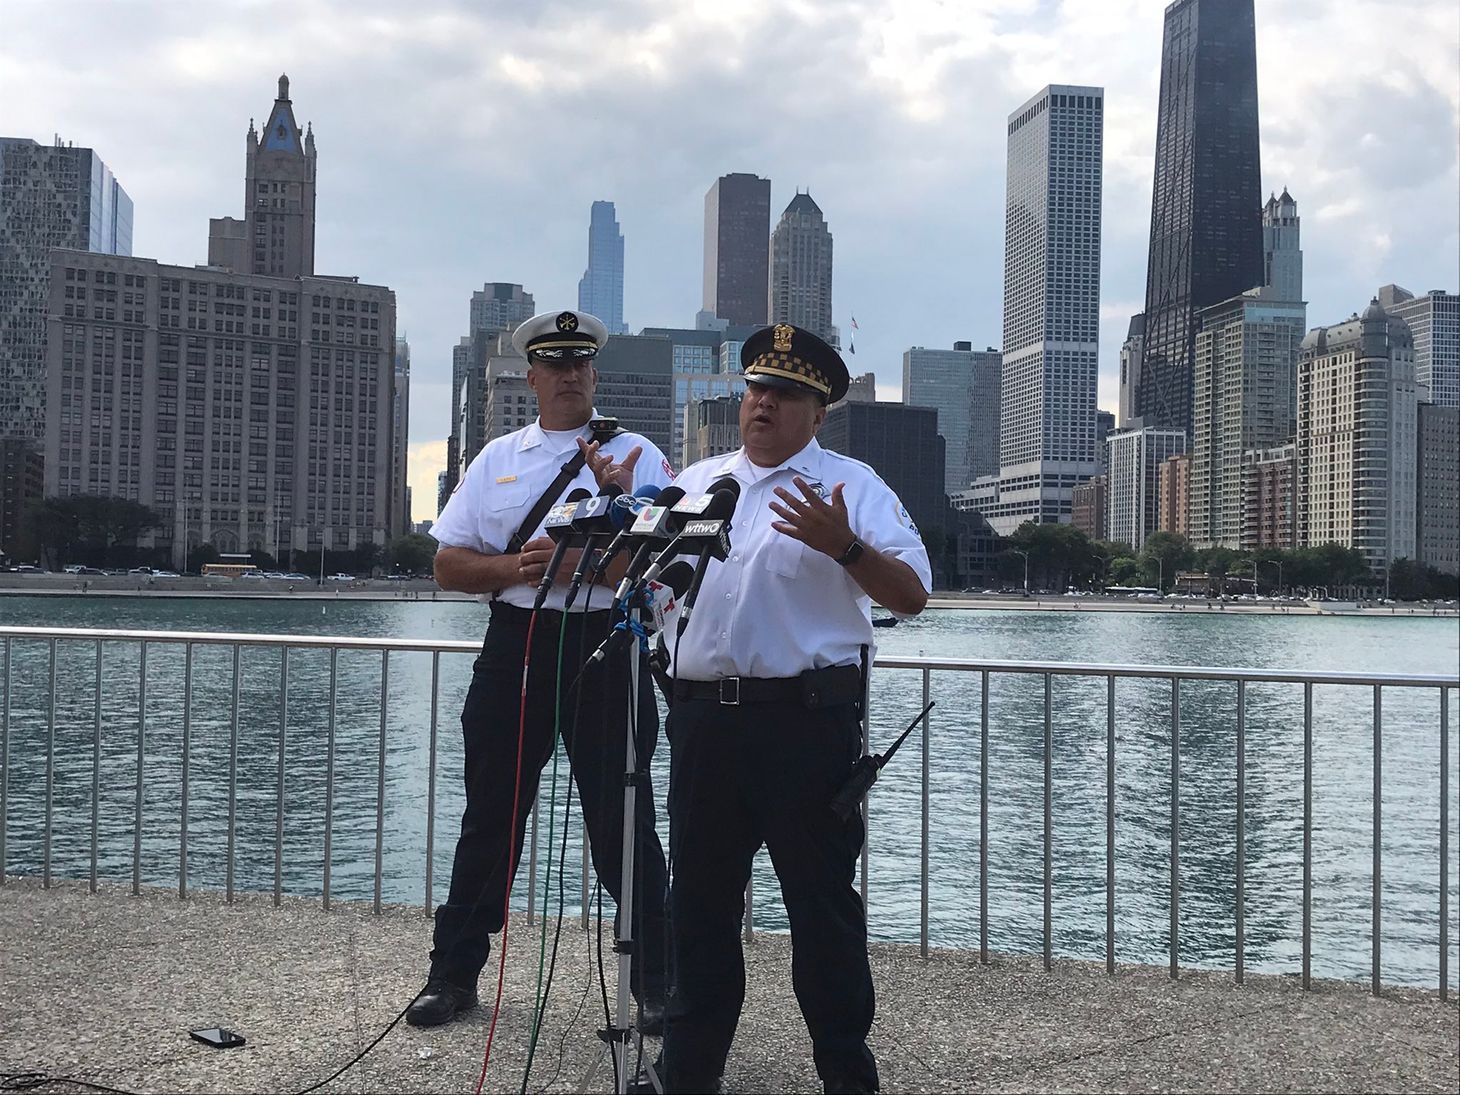 Chicago officials urge lakefront caution after drownings